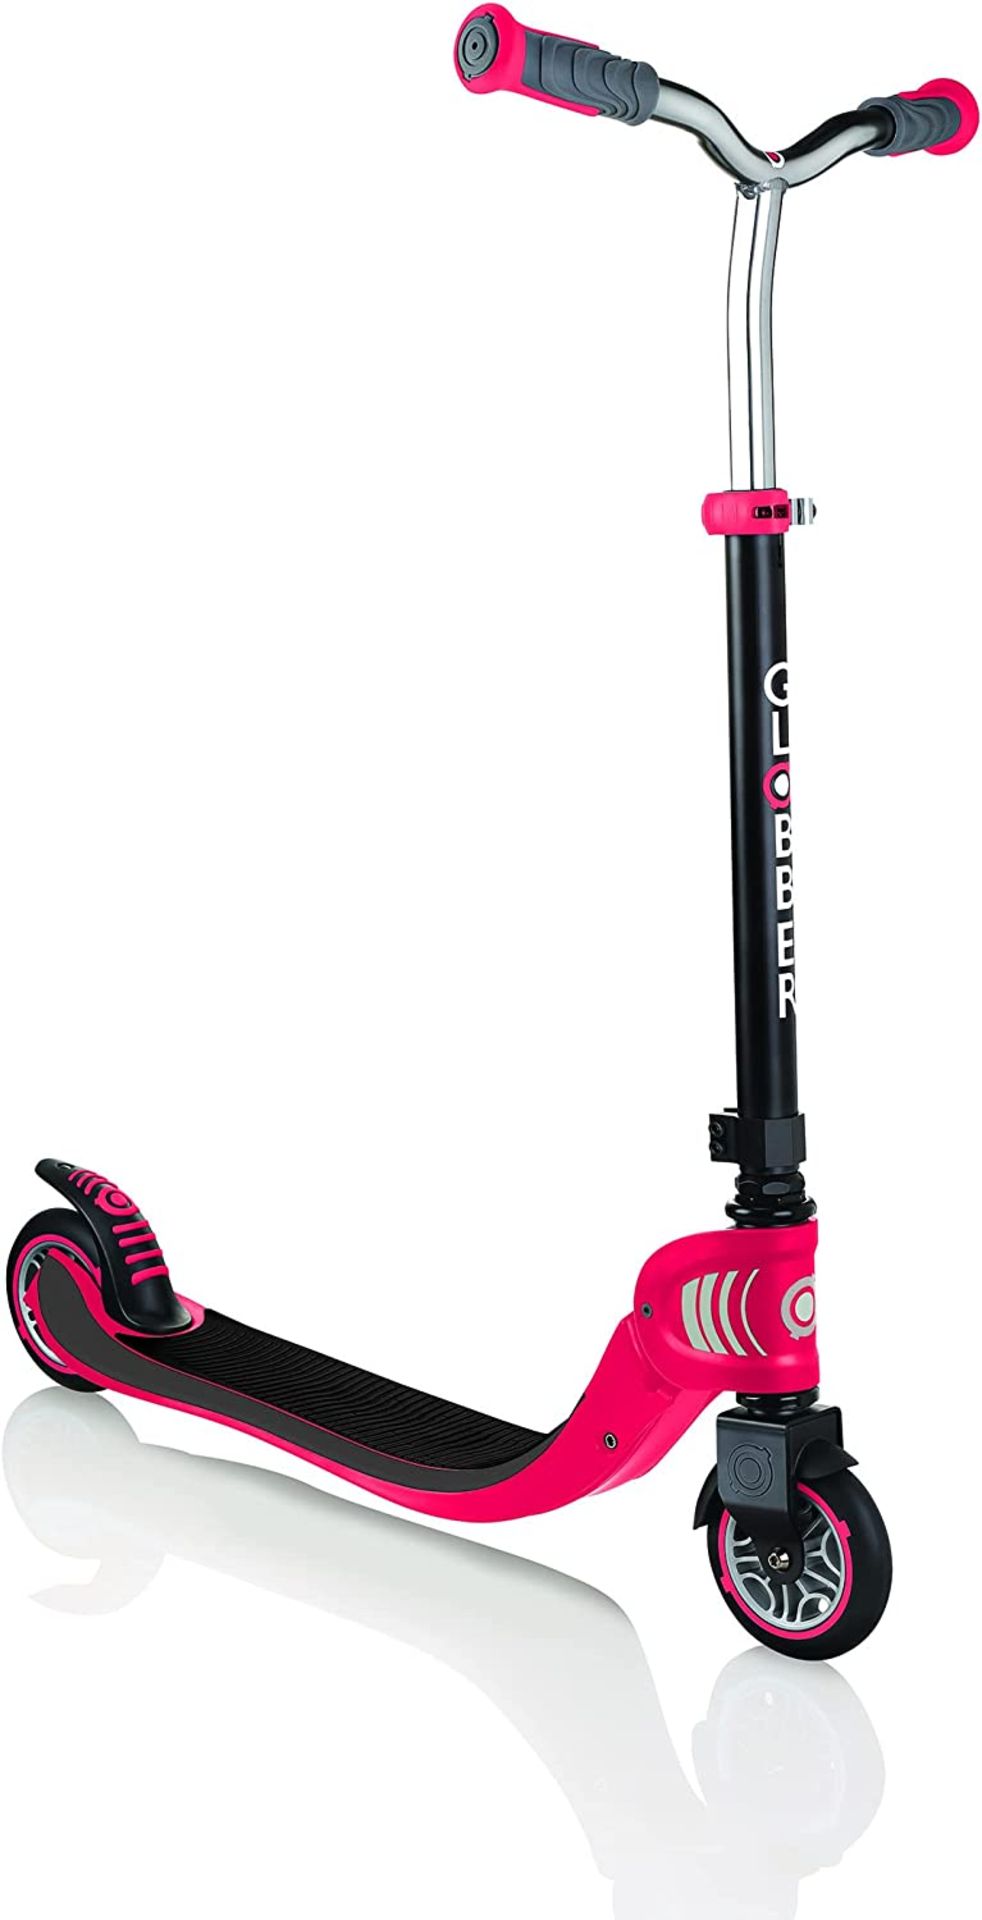 Globber Flow 125 . RRP £145.00. revolutionary design of the Flow 125 scooter makes it perfect for